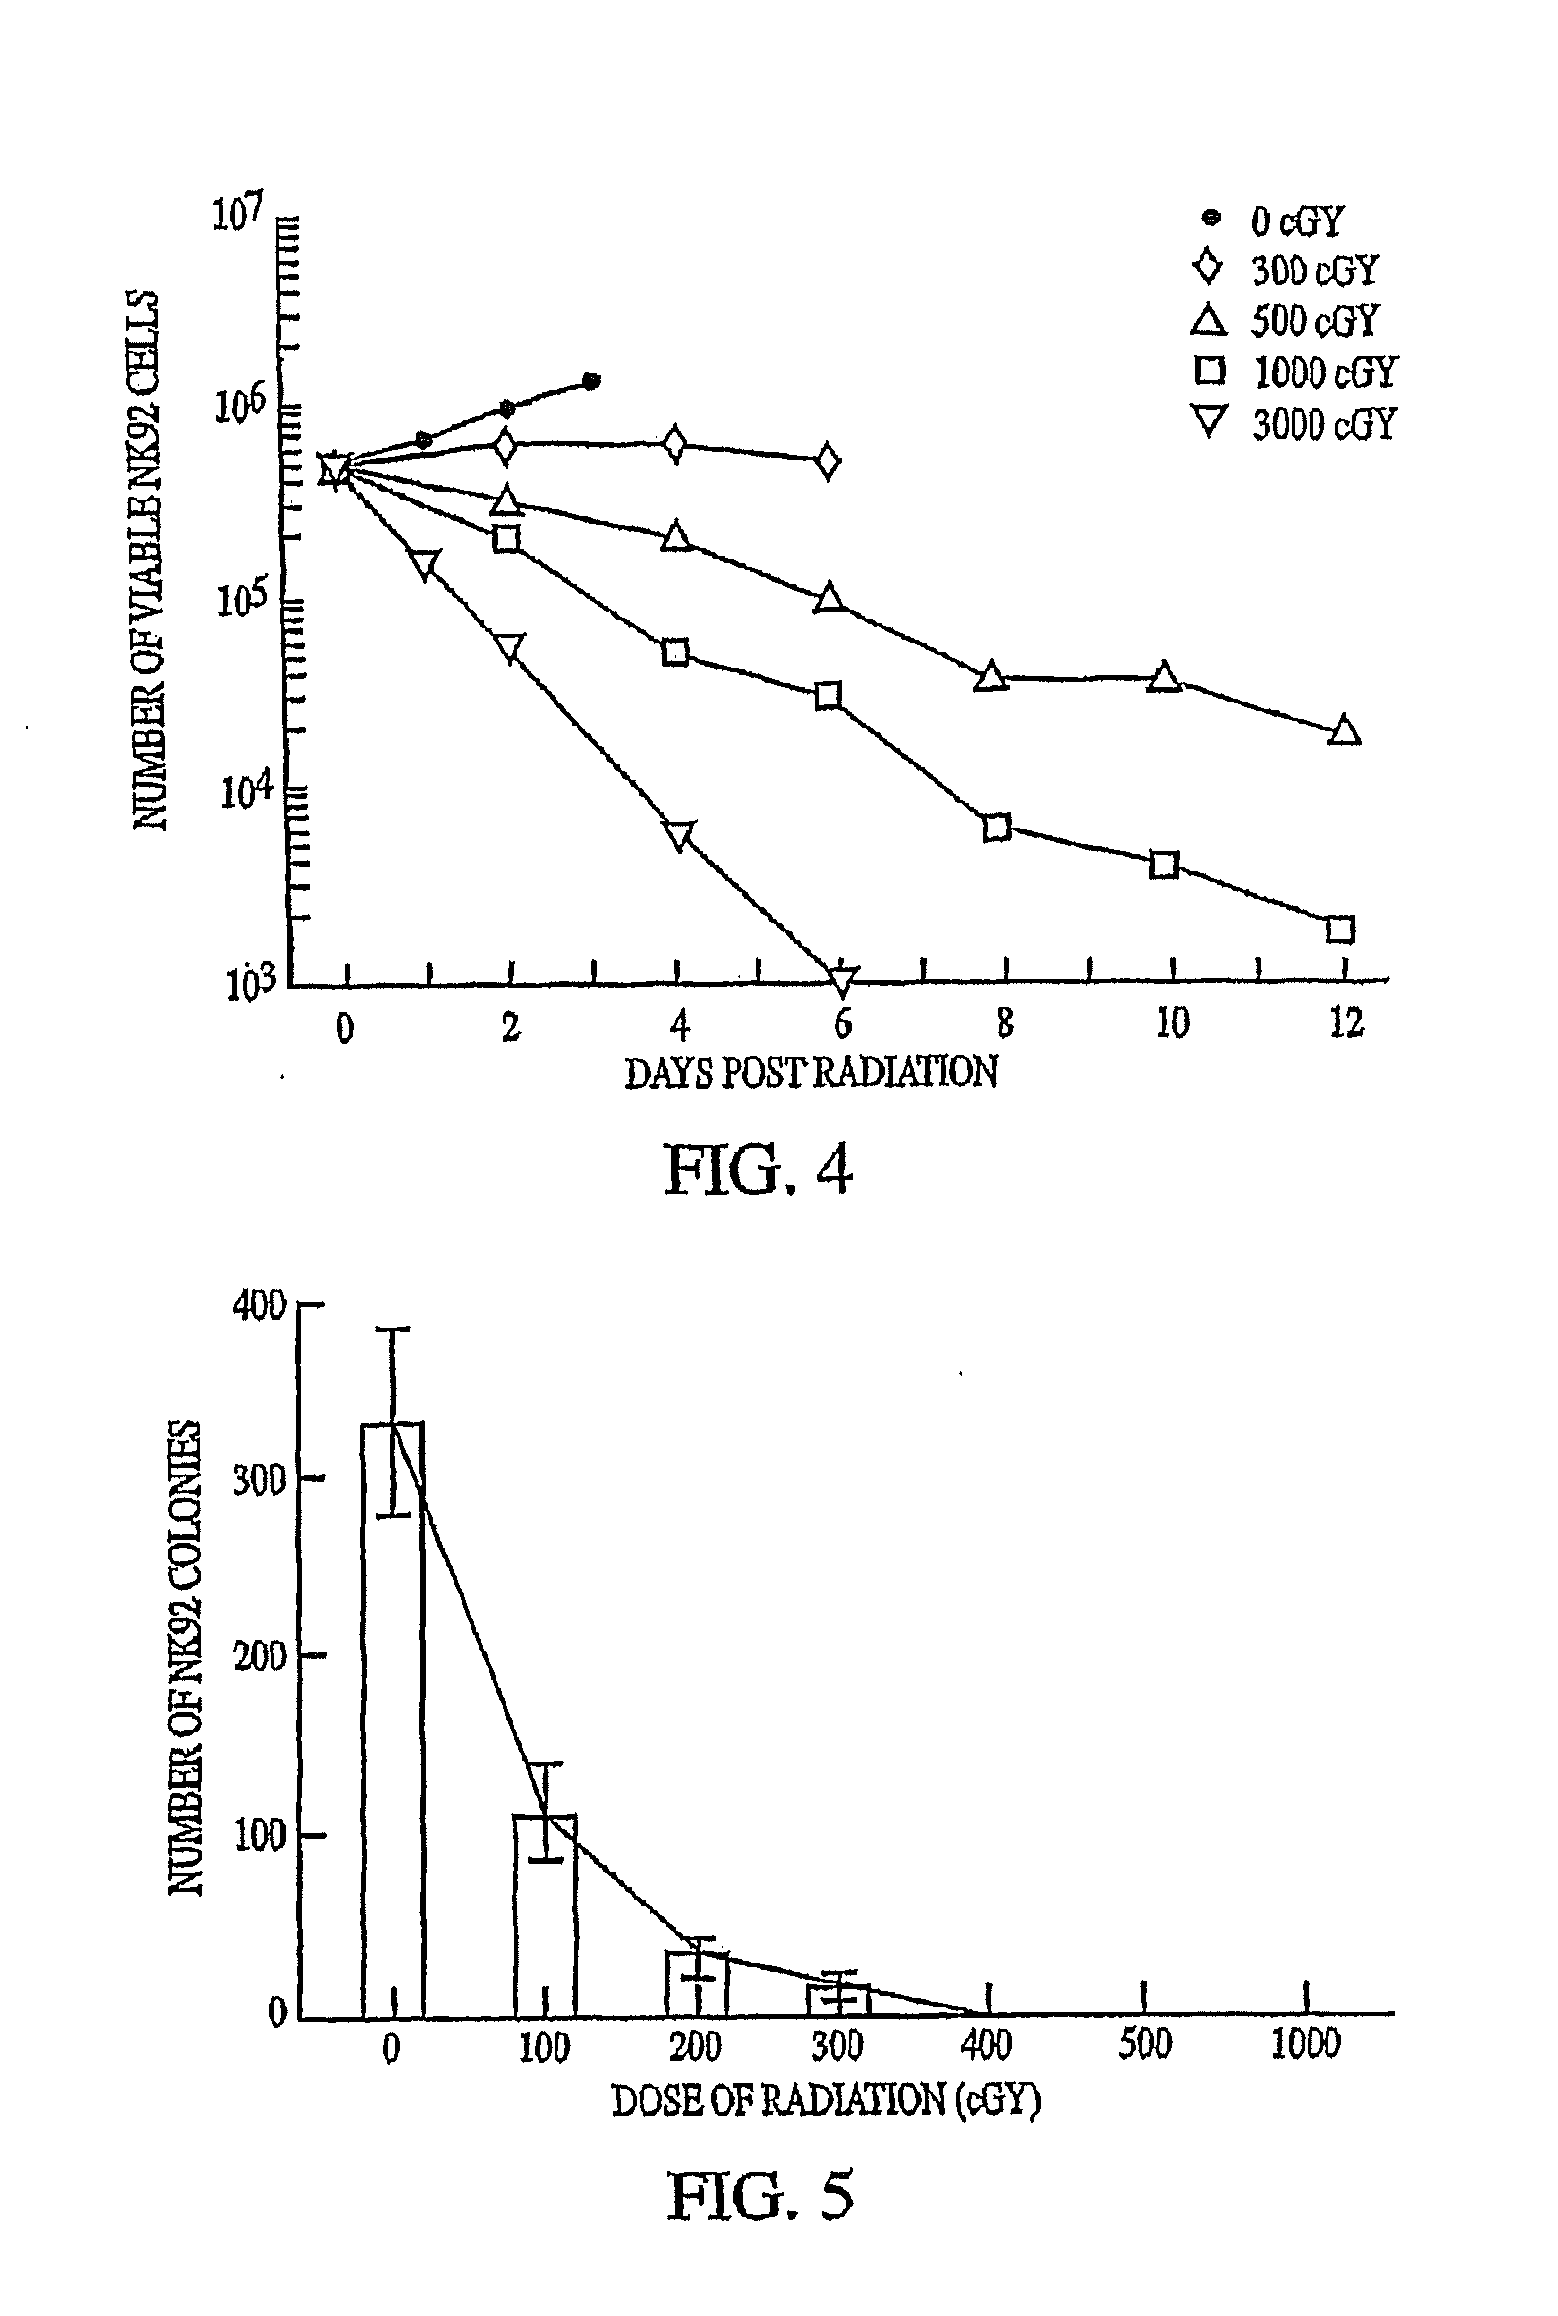 Natural killer cell lines and methods of use